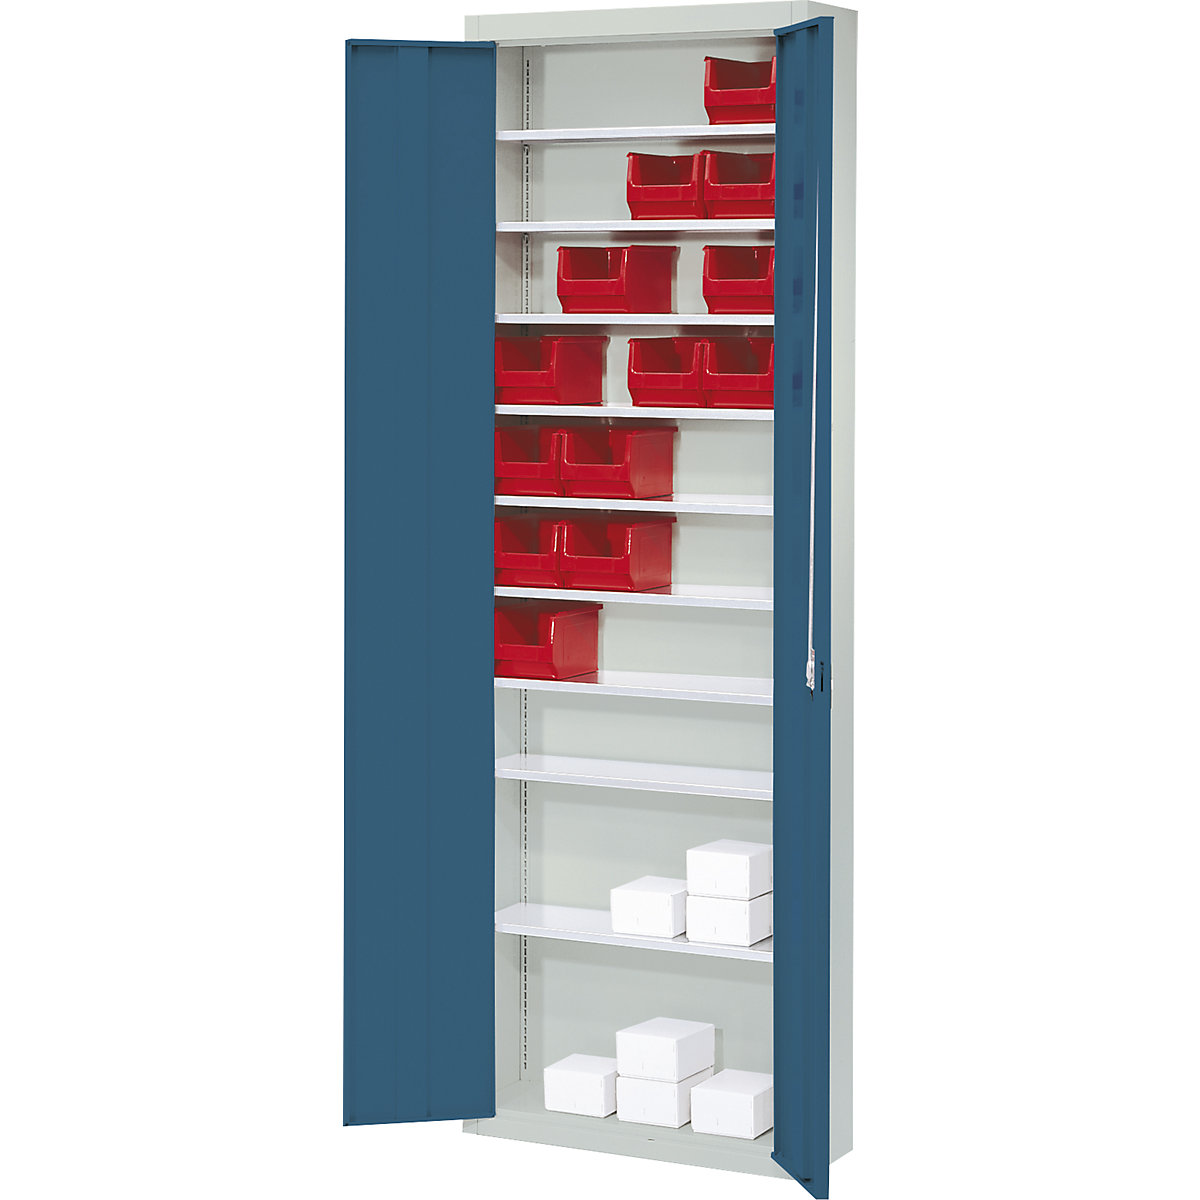 Storage cupboard, without open fronted storage bins – mauser, HxWxD 2150 x 680 x 280 mm, two-colour, grey body, blue doors-4